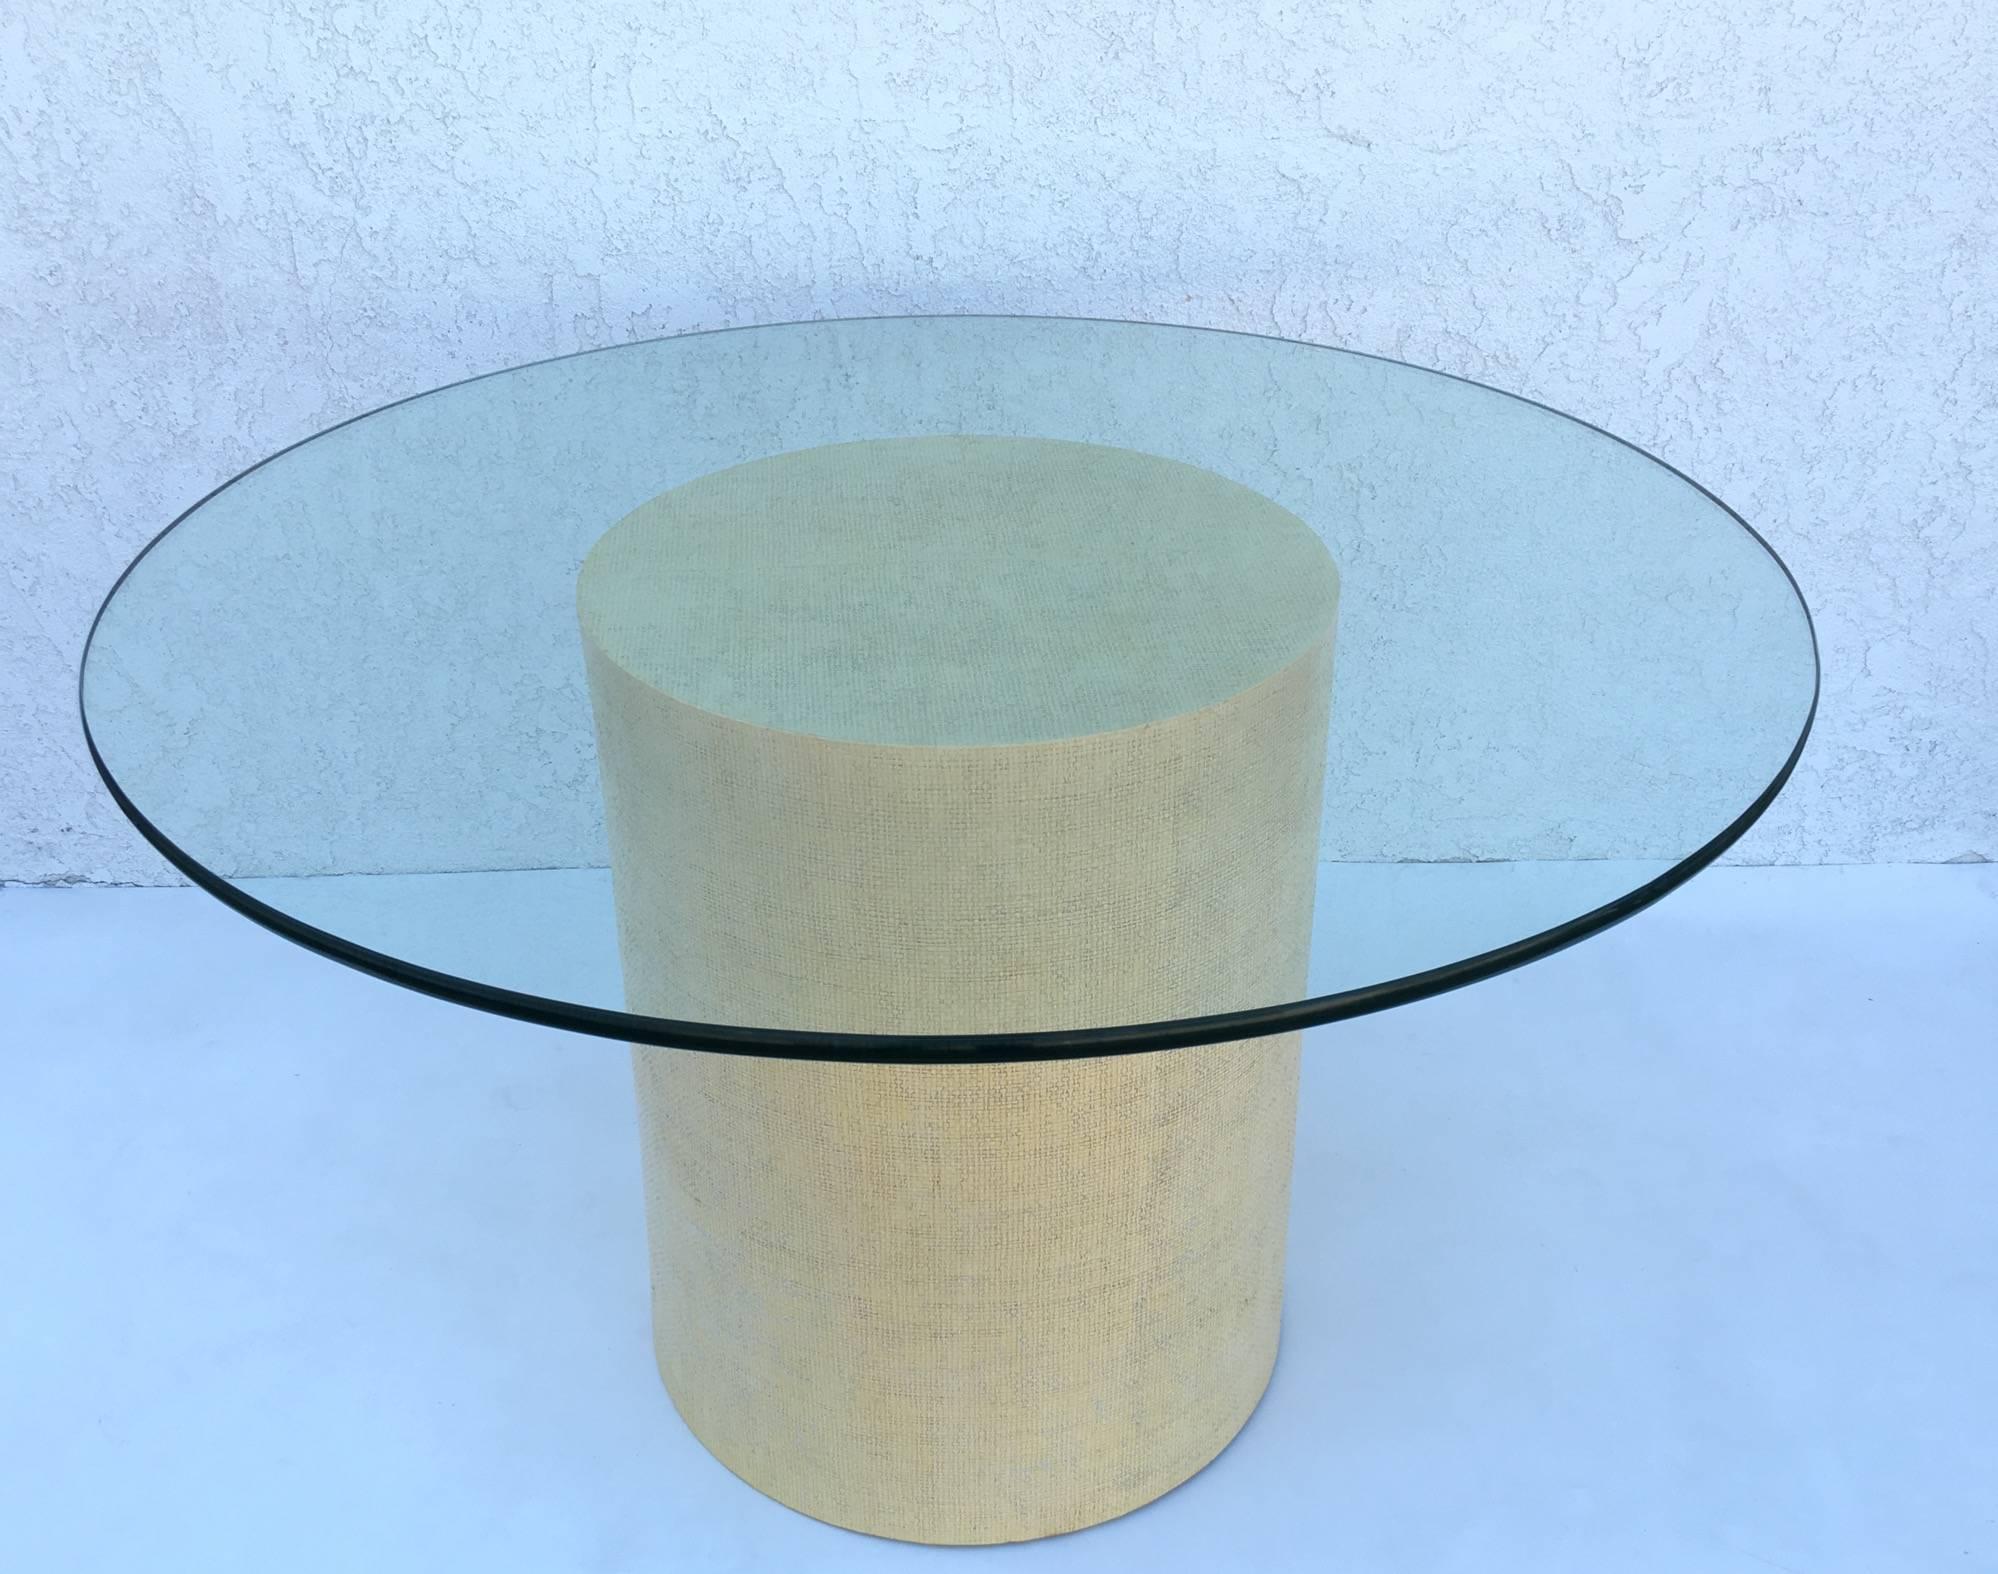 1980s dining table by Steve Chase. The base is raped with grasscloth and then lacquered in a cream color. The top is a 48